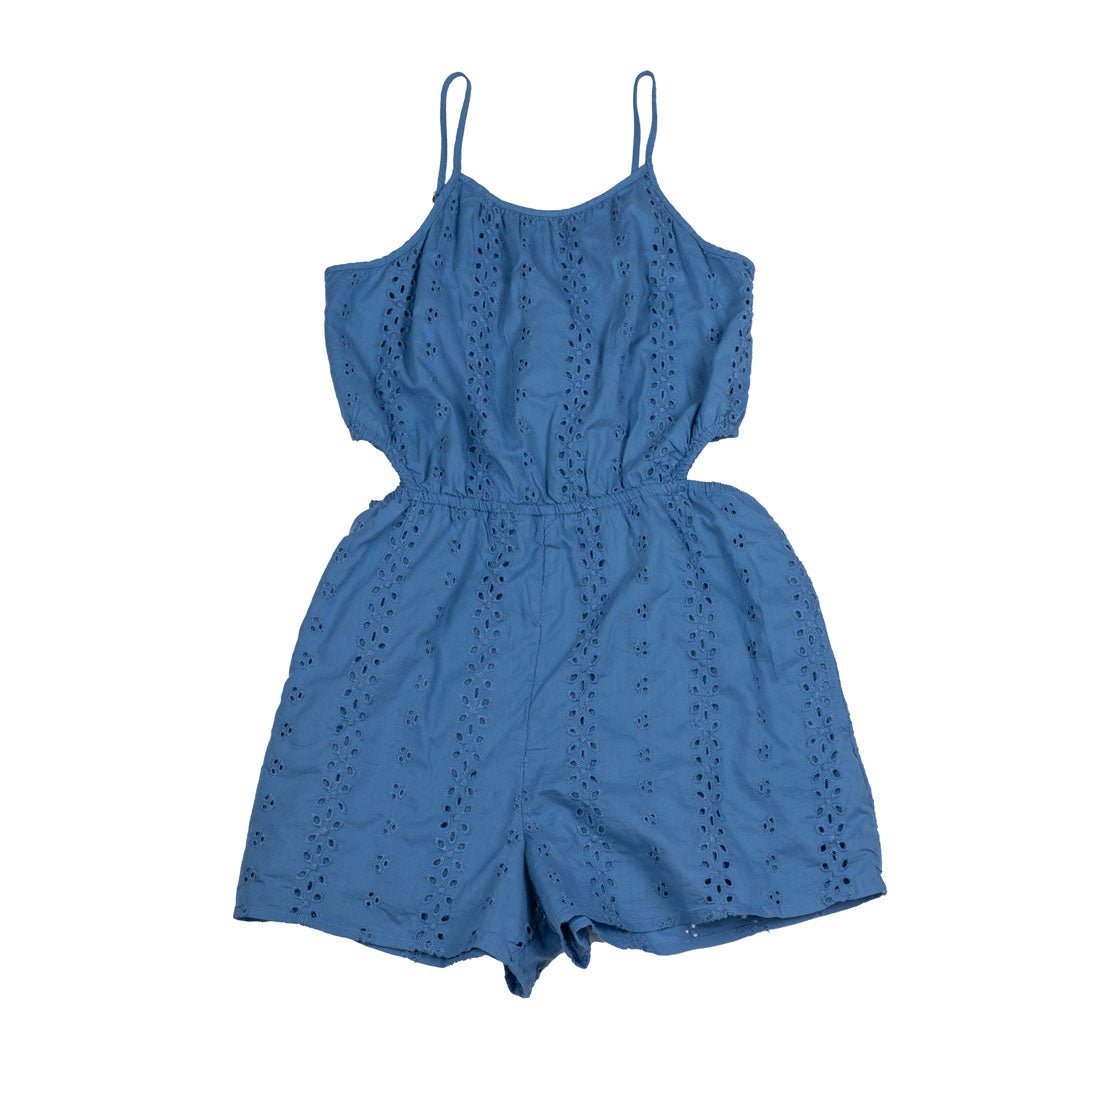 Abercrombie Kids Brand New Jumpsuit For Girls - mymadstore.com